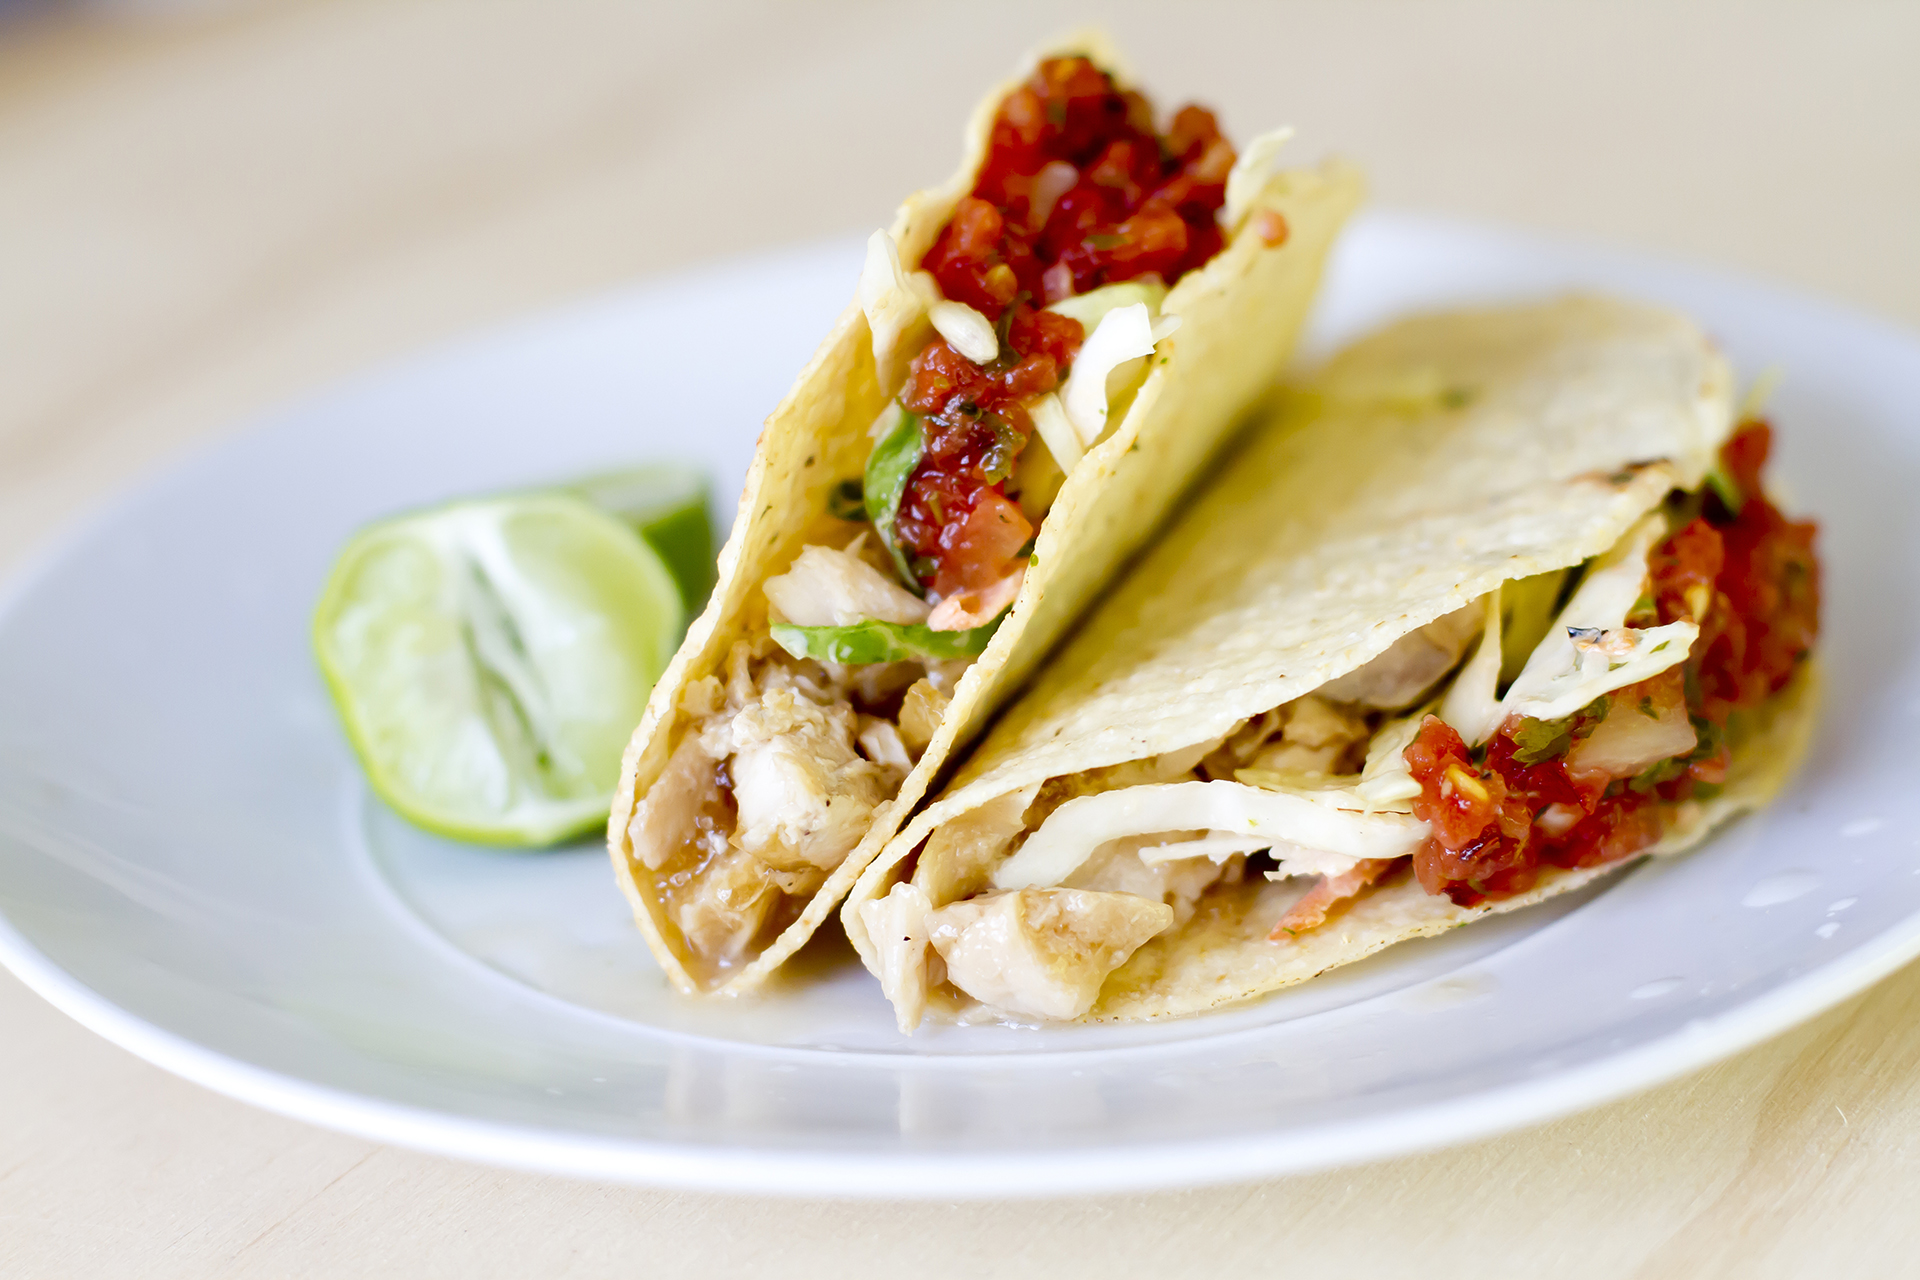 fish tacos - Stax Omega Diner - Restaurants, Catering, and Bakery